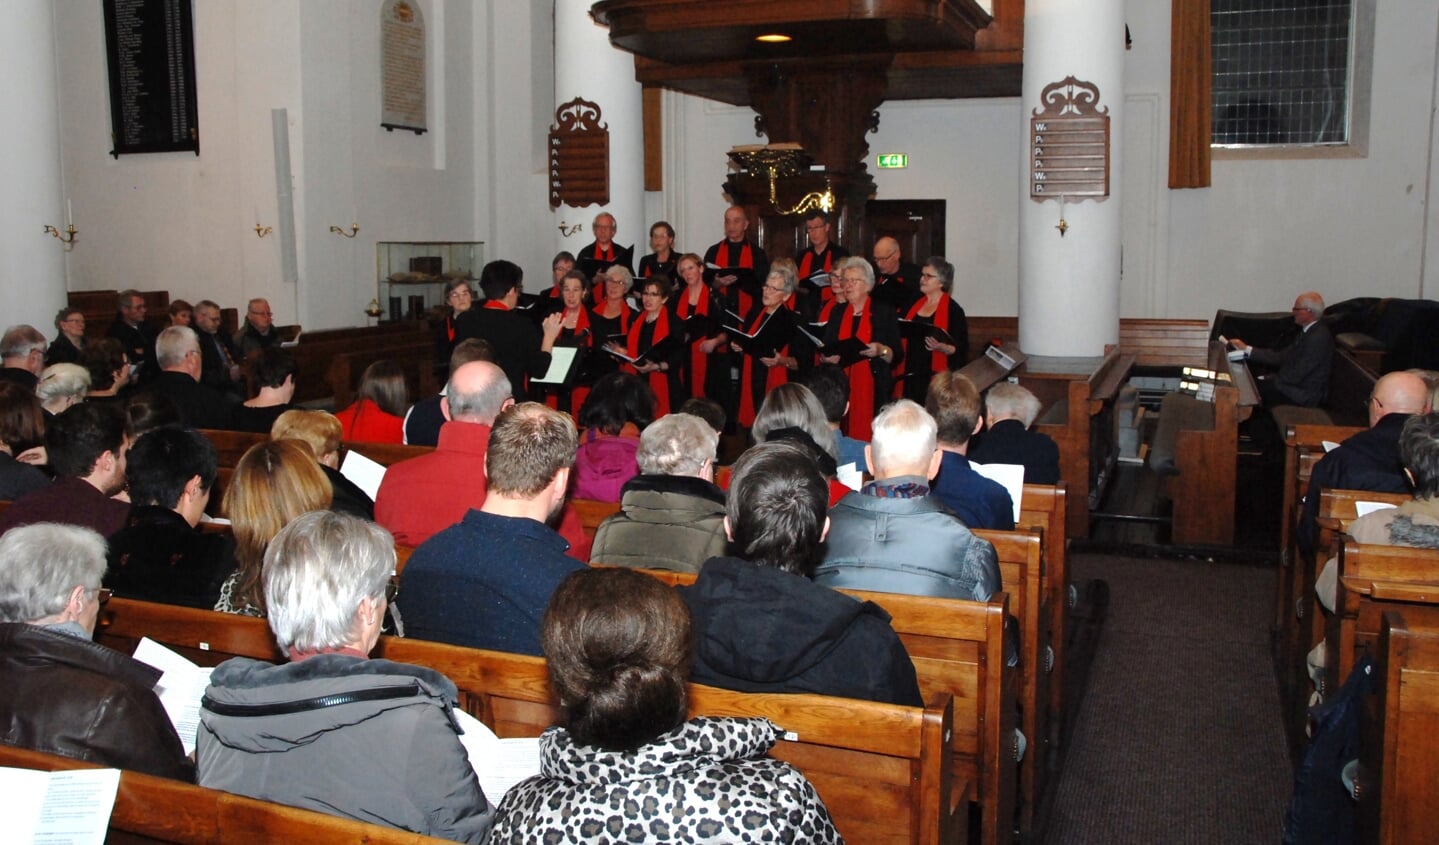 In een goed gevulde keer  bracht Con Amore The Festival of Nini Lessons & Carols.